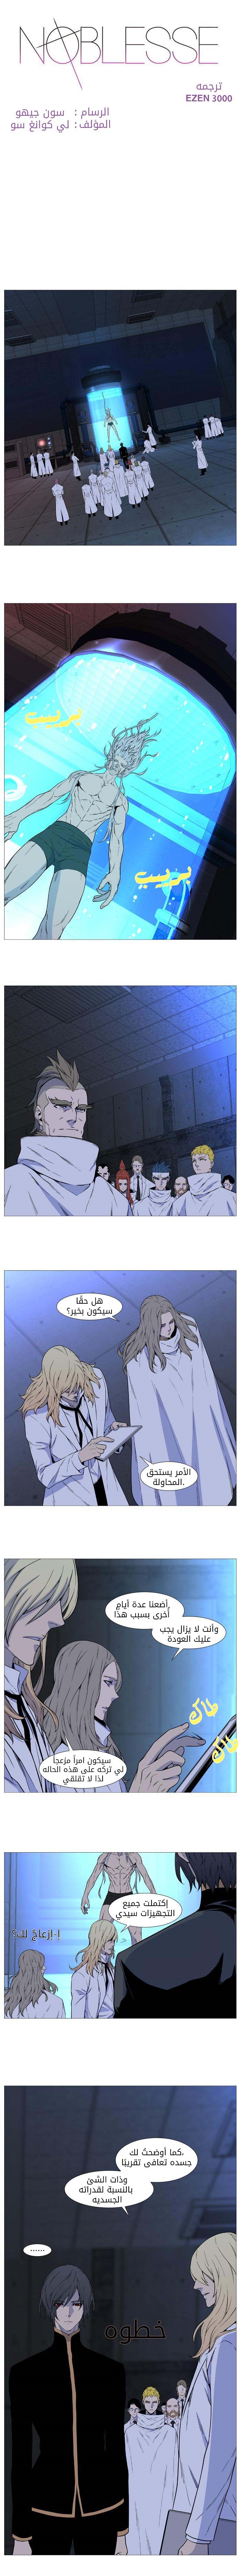 Noblesse: Chapter 513 - Page 1